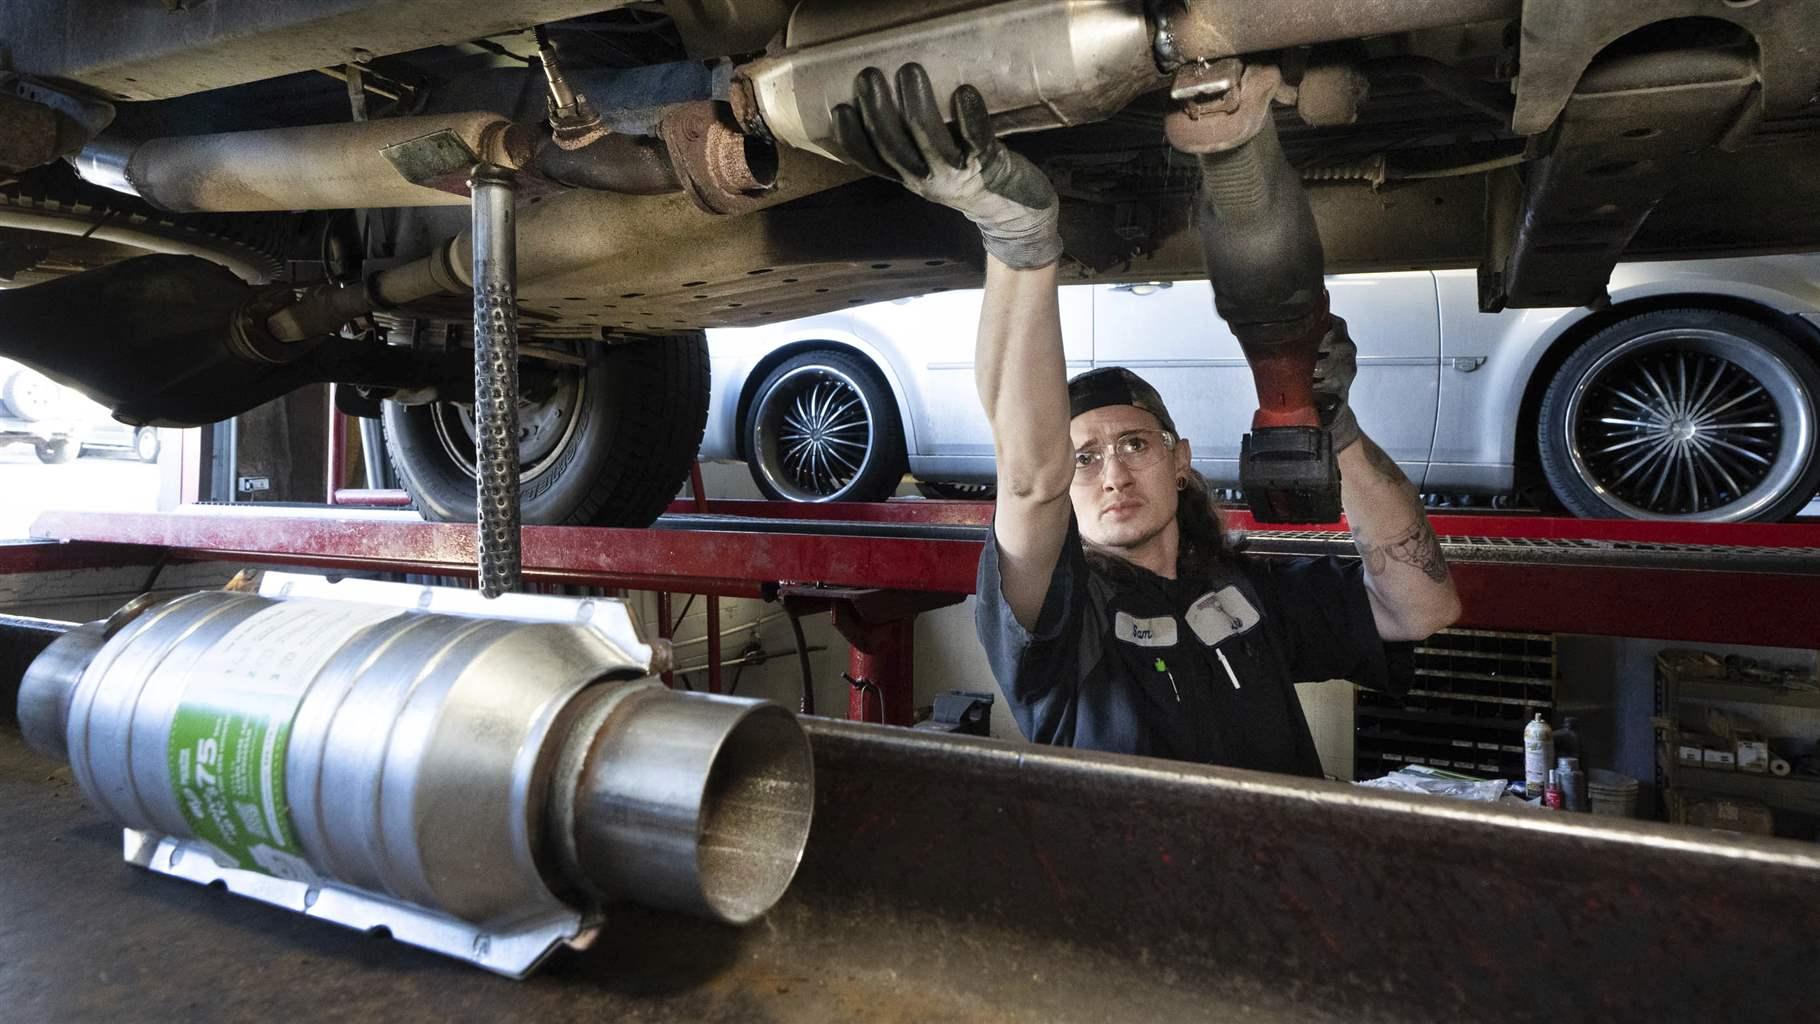 Sam Howard, assistant manager at Master Muffler in Murray replaces a worn out catalytic converter on a vehicle on Thursday, Jan. 20, 2022 in Salt Lake City. Catalytic converter thefts are spiking in Utah, and some legislation is being considered to help track stolen converters.